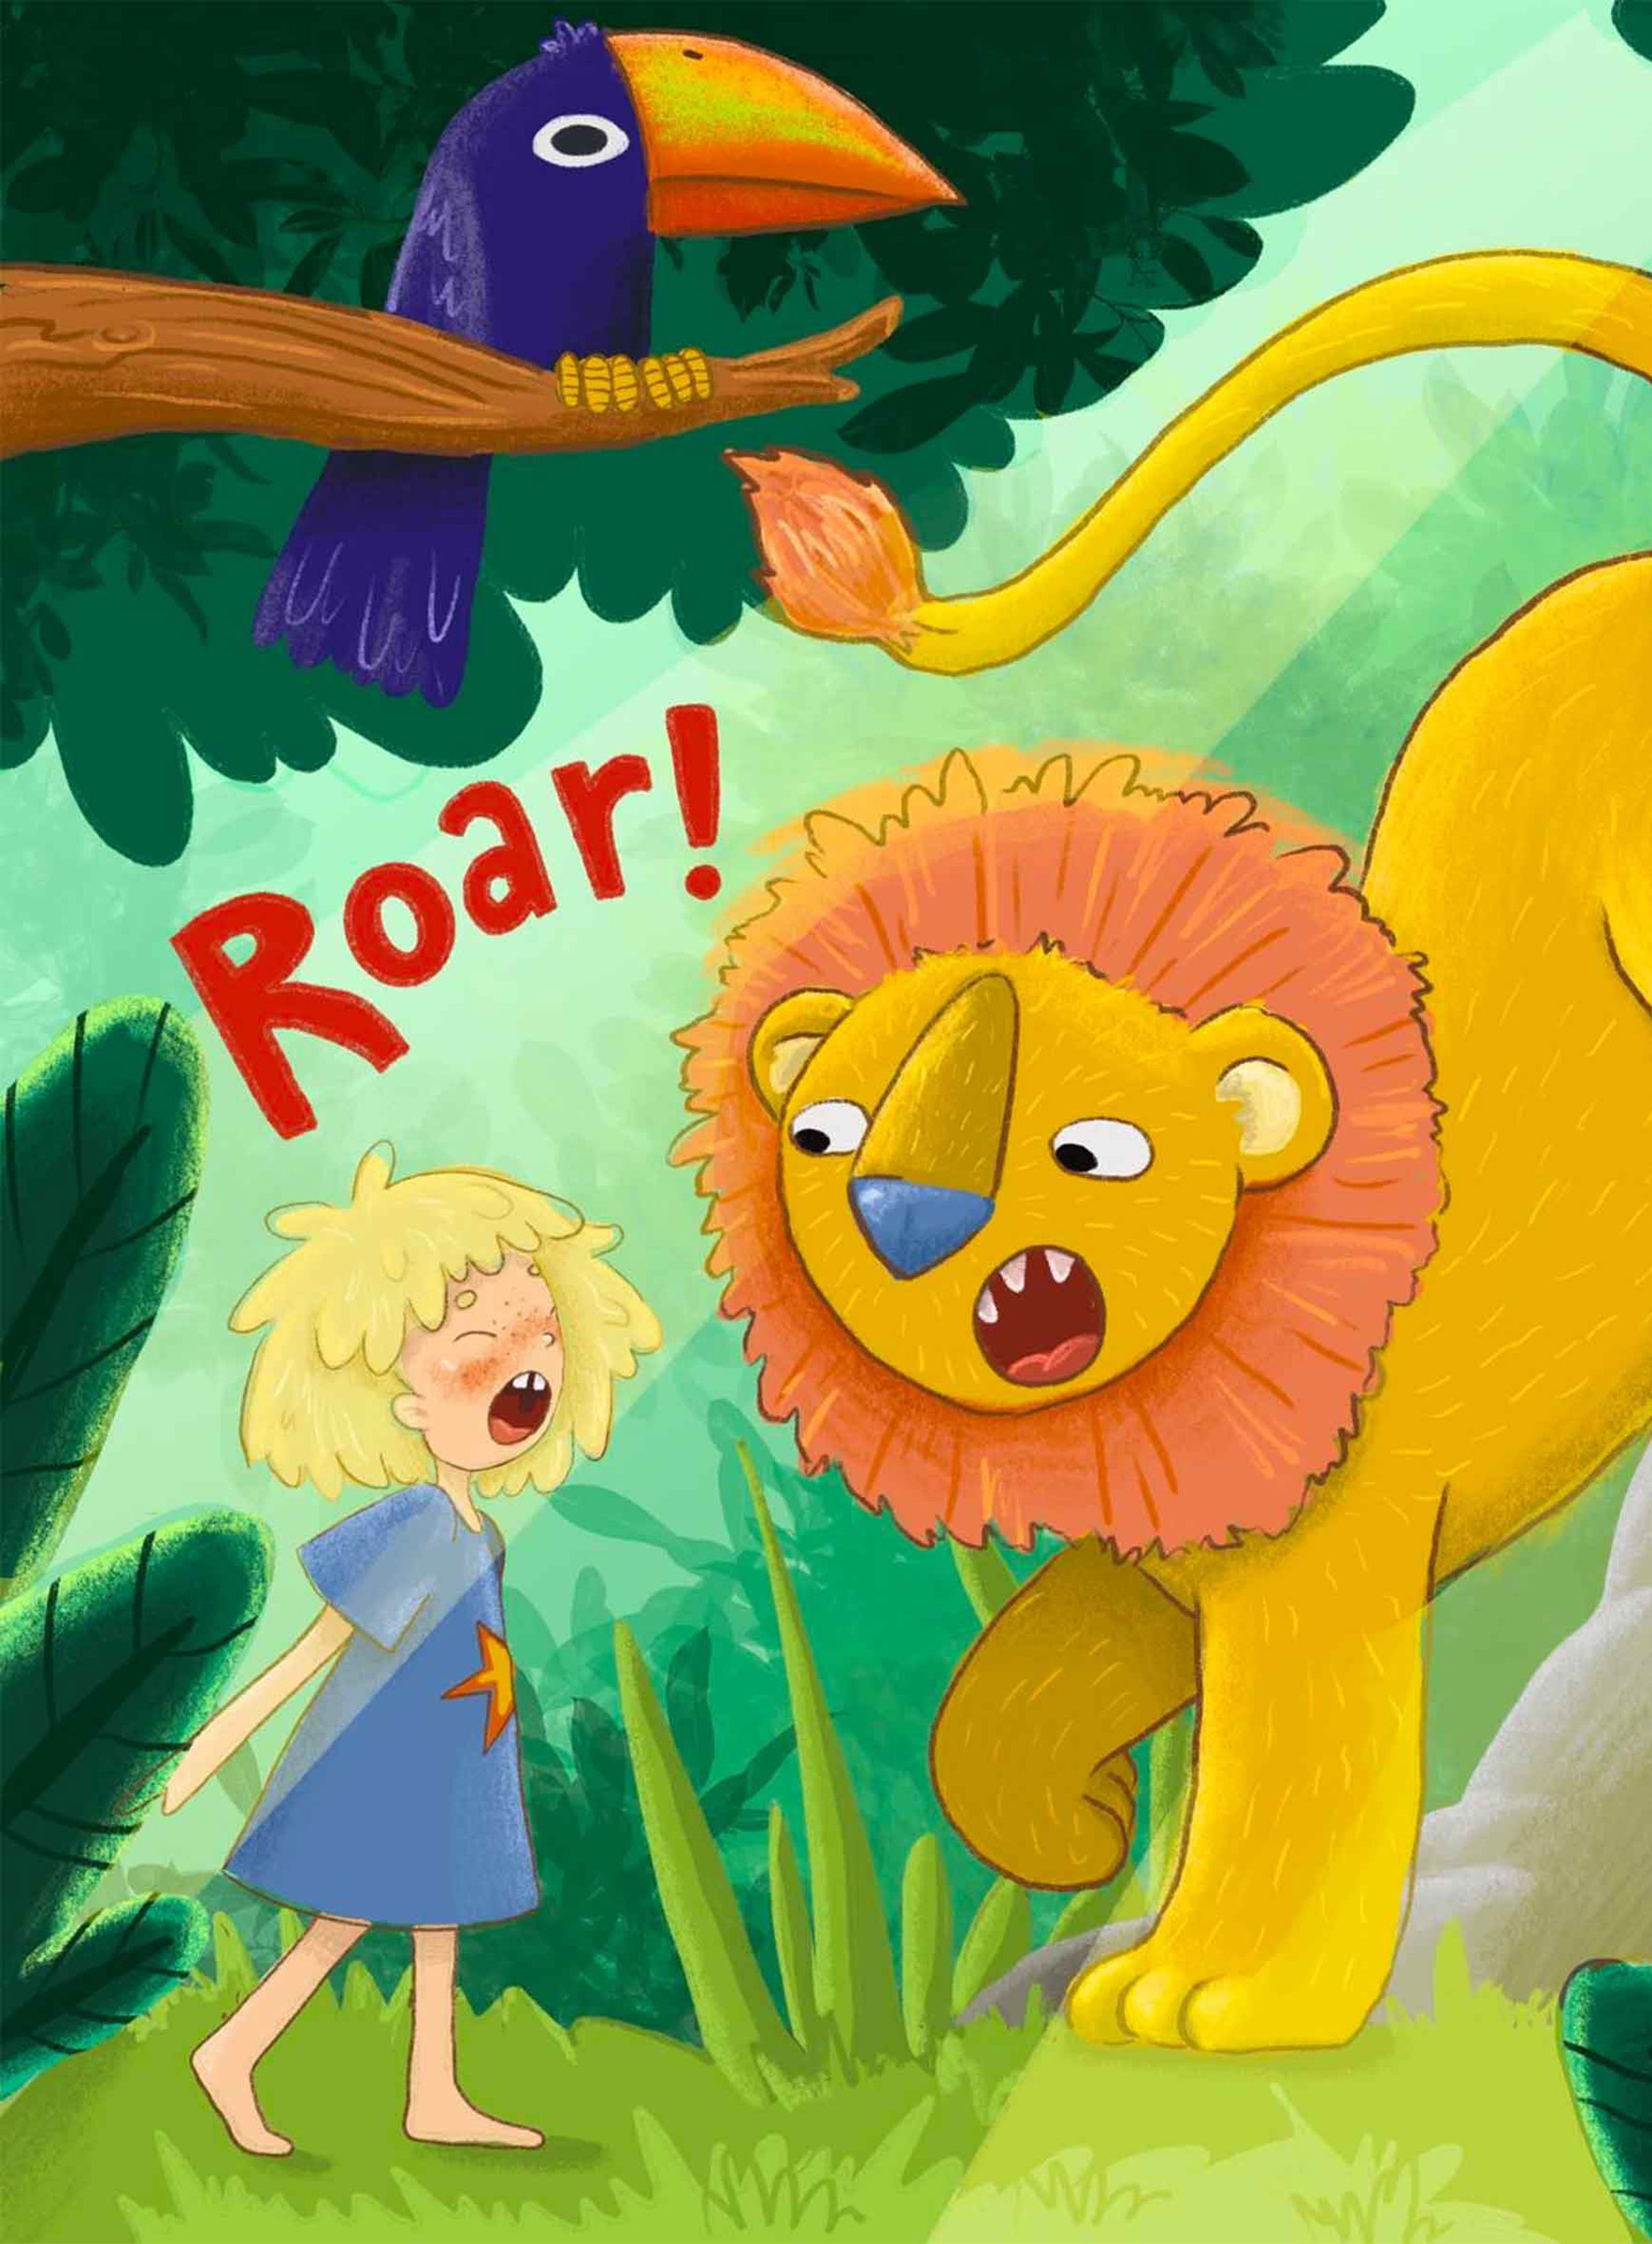 Illustration artwork by Maddison Dunn showing a colourful forest scene for children. A blonde girl, a toucan and a lion with a red "Roar!" text.